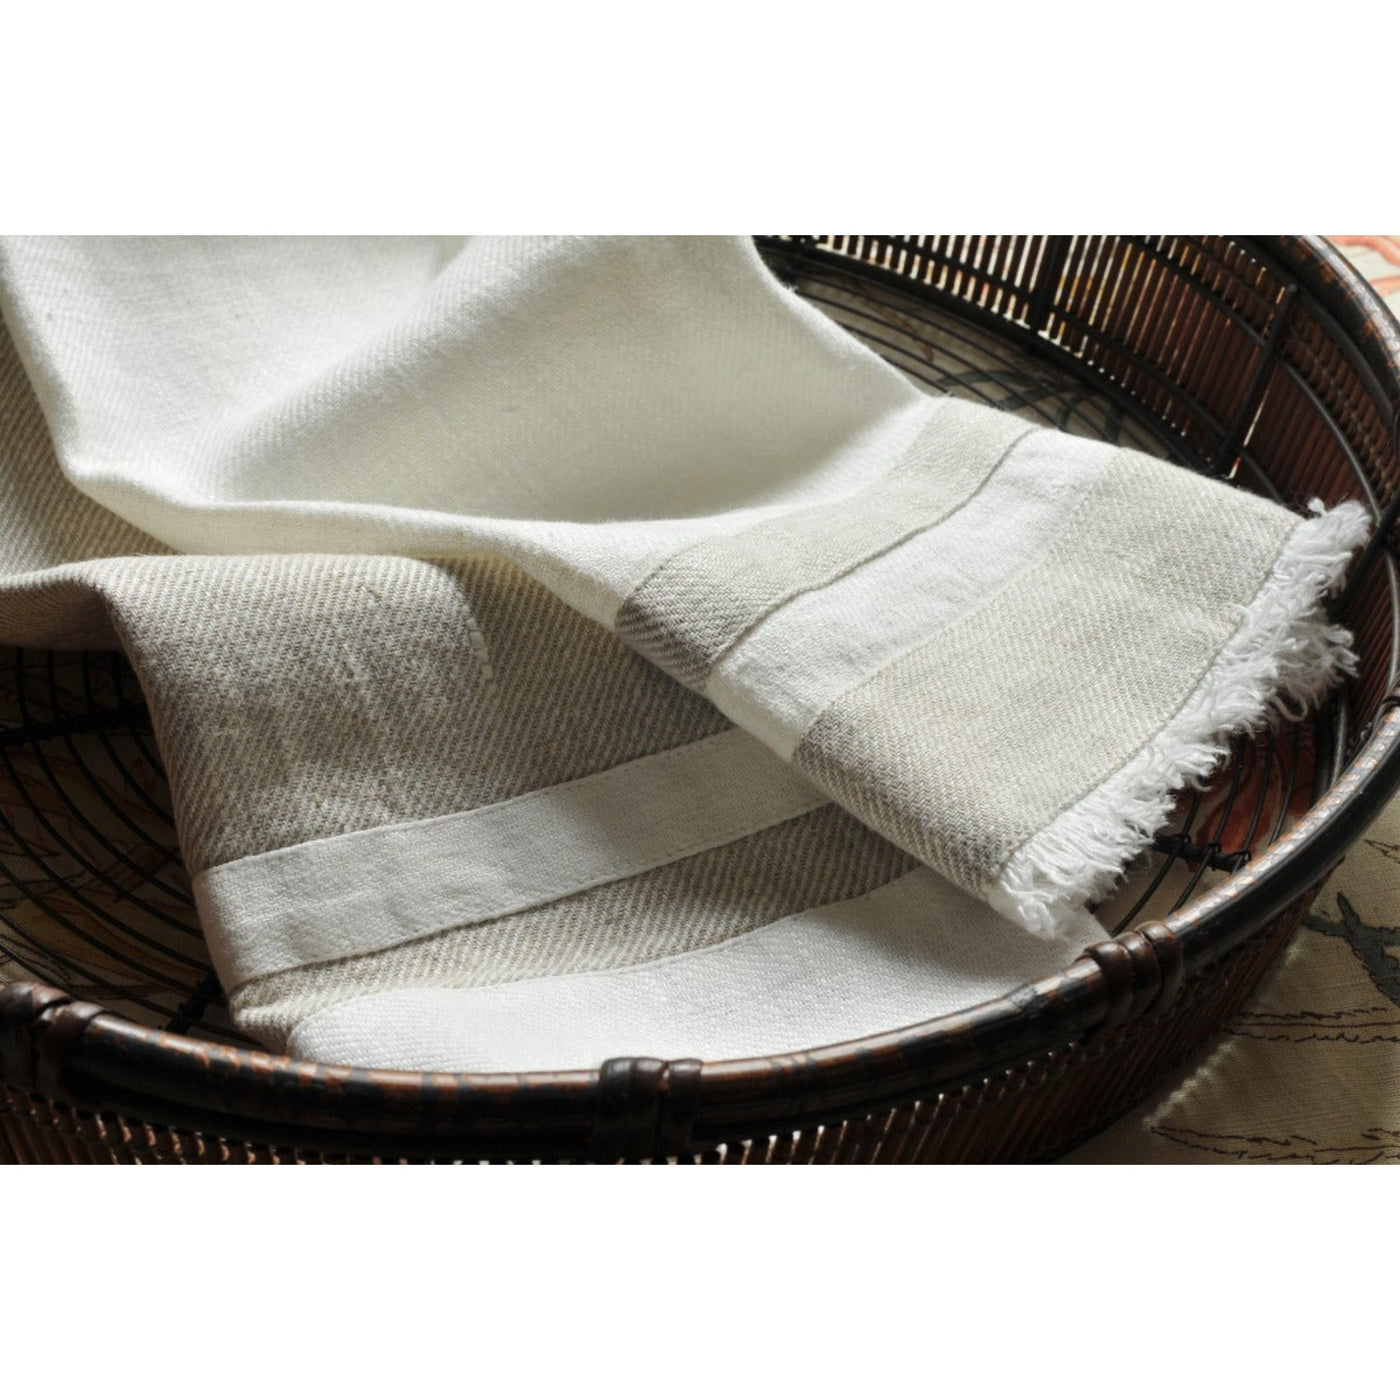 Lipari Linen Guest Towel: in basket. Beige with white stripes and fringed edges.